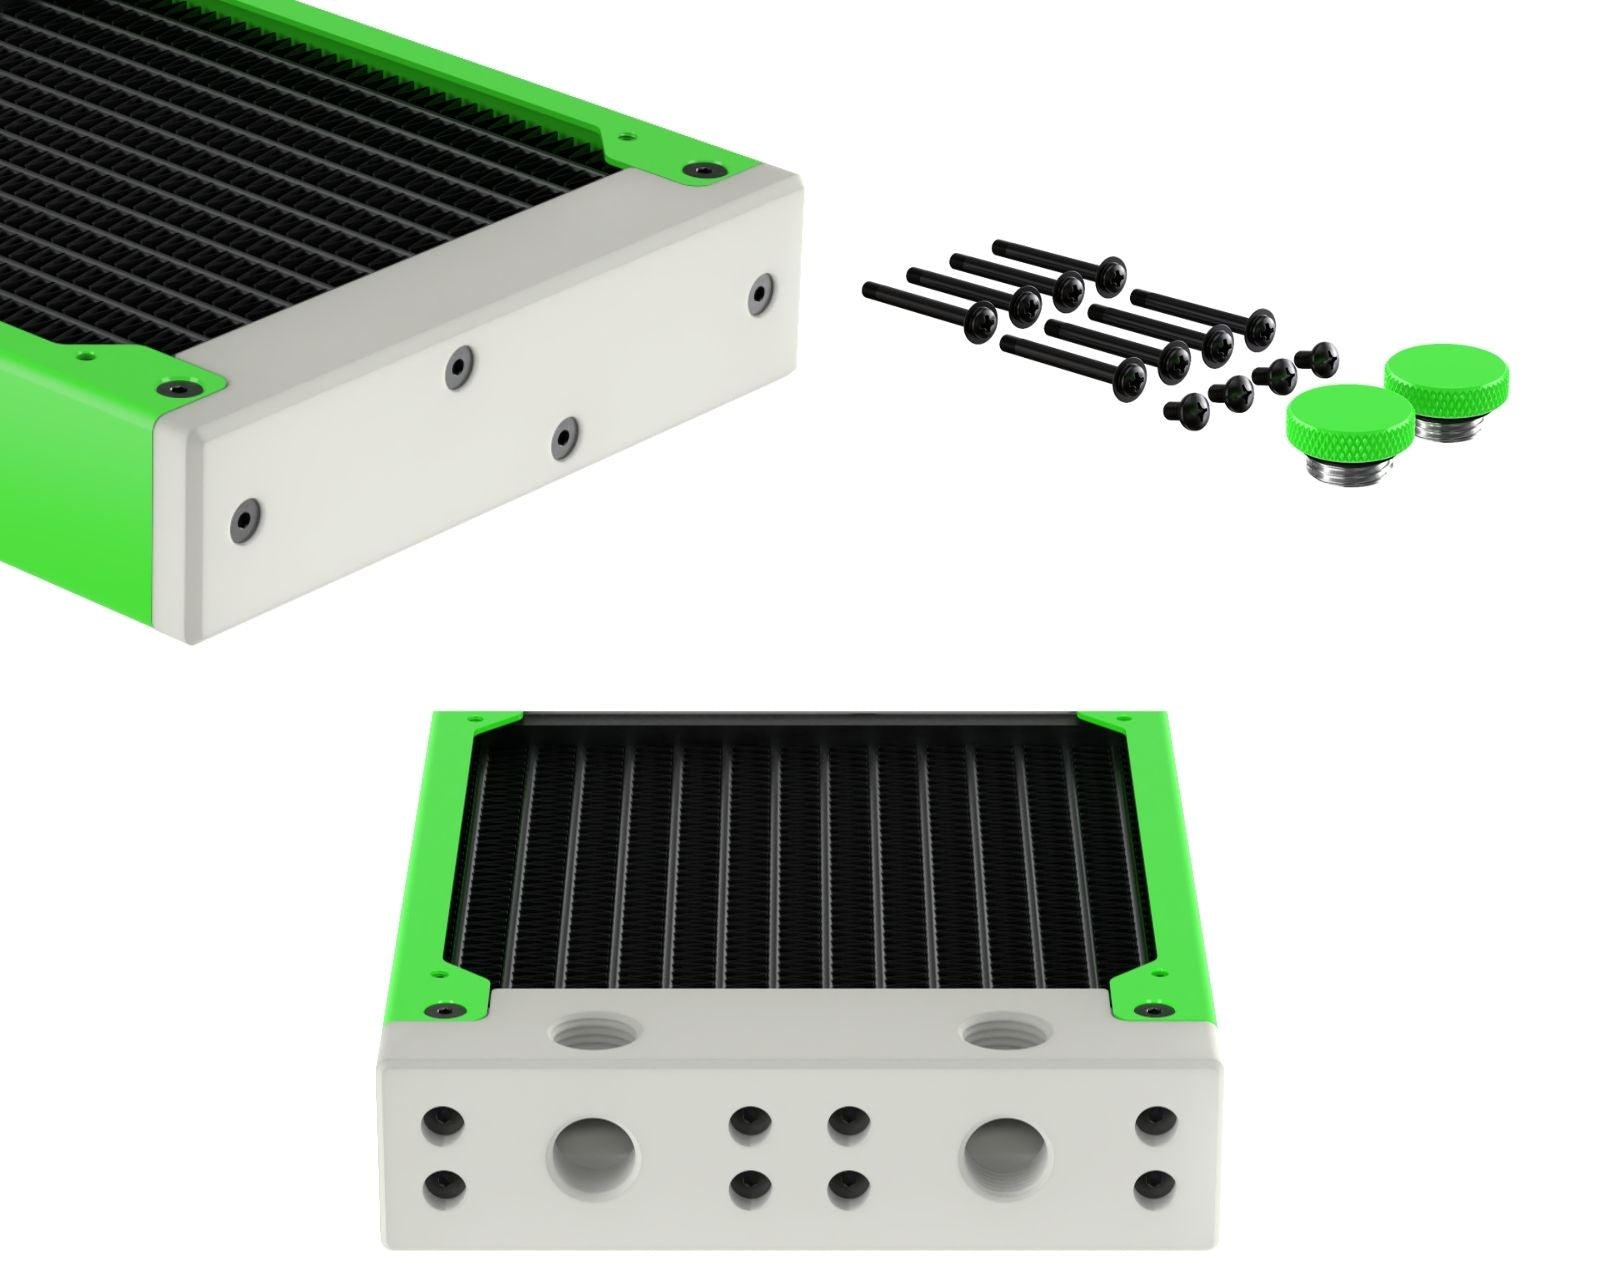 PrimoChill 240SL (30mm) EXIMO Modular Radiator, White POM, 2x120mm, Dual Fan (R-SL-W24) Available in 20+ Colors, Assembled in USA and Custom Watercooling Loop Ready - UV Green